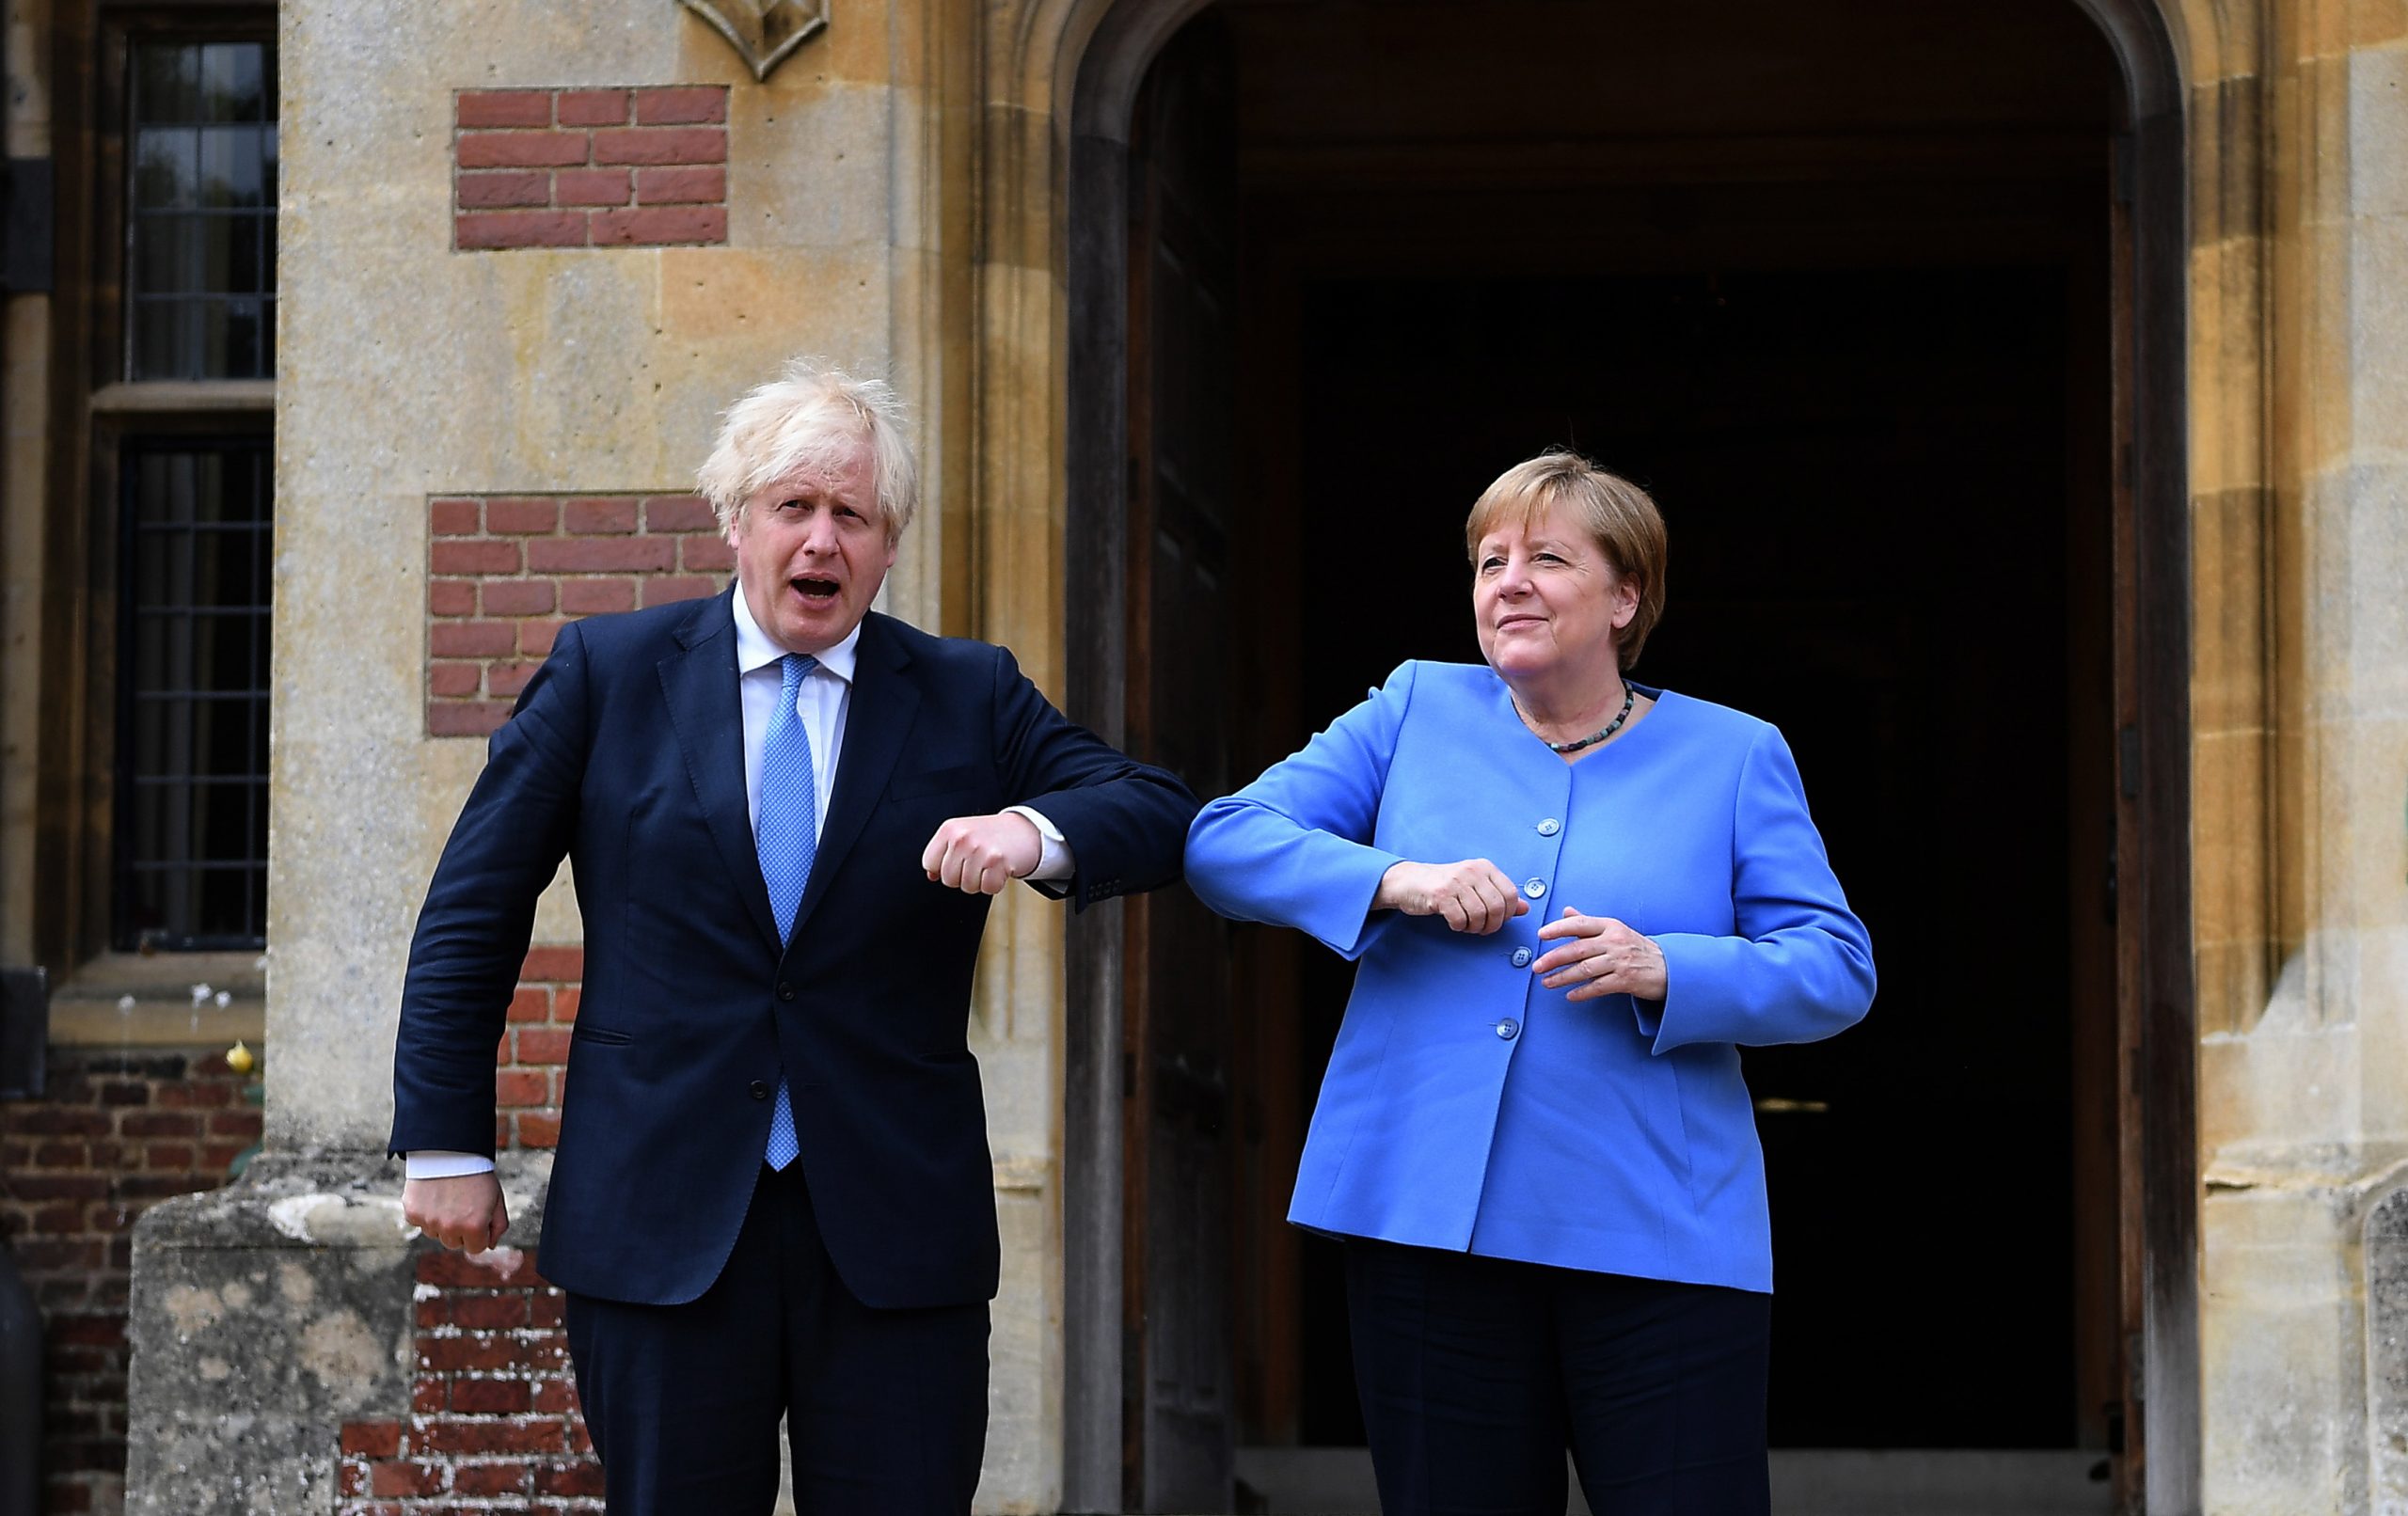 epa09317272 British Prime Minister Boris Johnson (L) and German Chancellor Angela Merkel do an elbow check at the Prime Minster's country residence at Chequers, Buckinghamshire, Britain, 02 July 2021. The two nations have agreed a post Brexit  joint declaration on foreign and security policy cooperation. The bilateral agreement is the first to be struck between London and Berlin on foreign and security policy issues.  EPA/ANDY RAIN / POOL